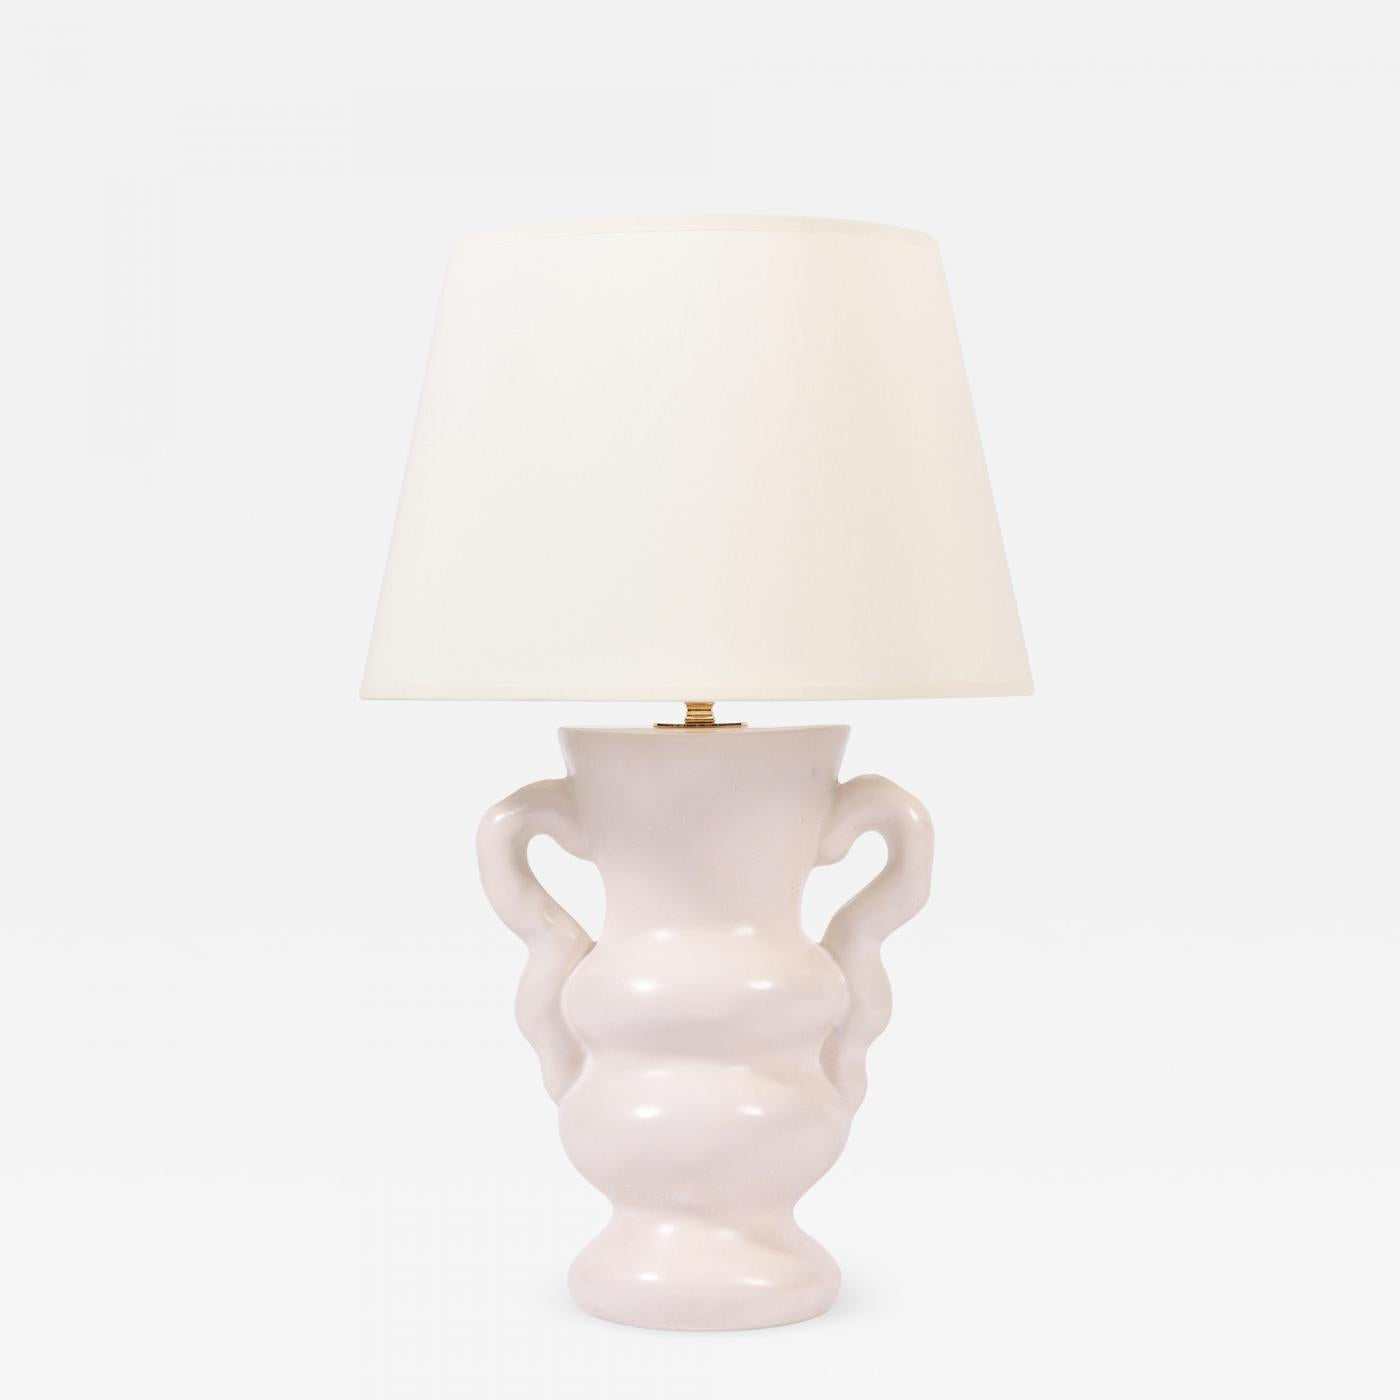 White Polished Plaster Table Lamp, by Dorian Caffot de Fawes